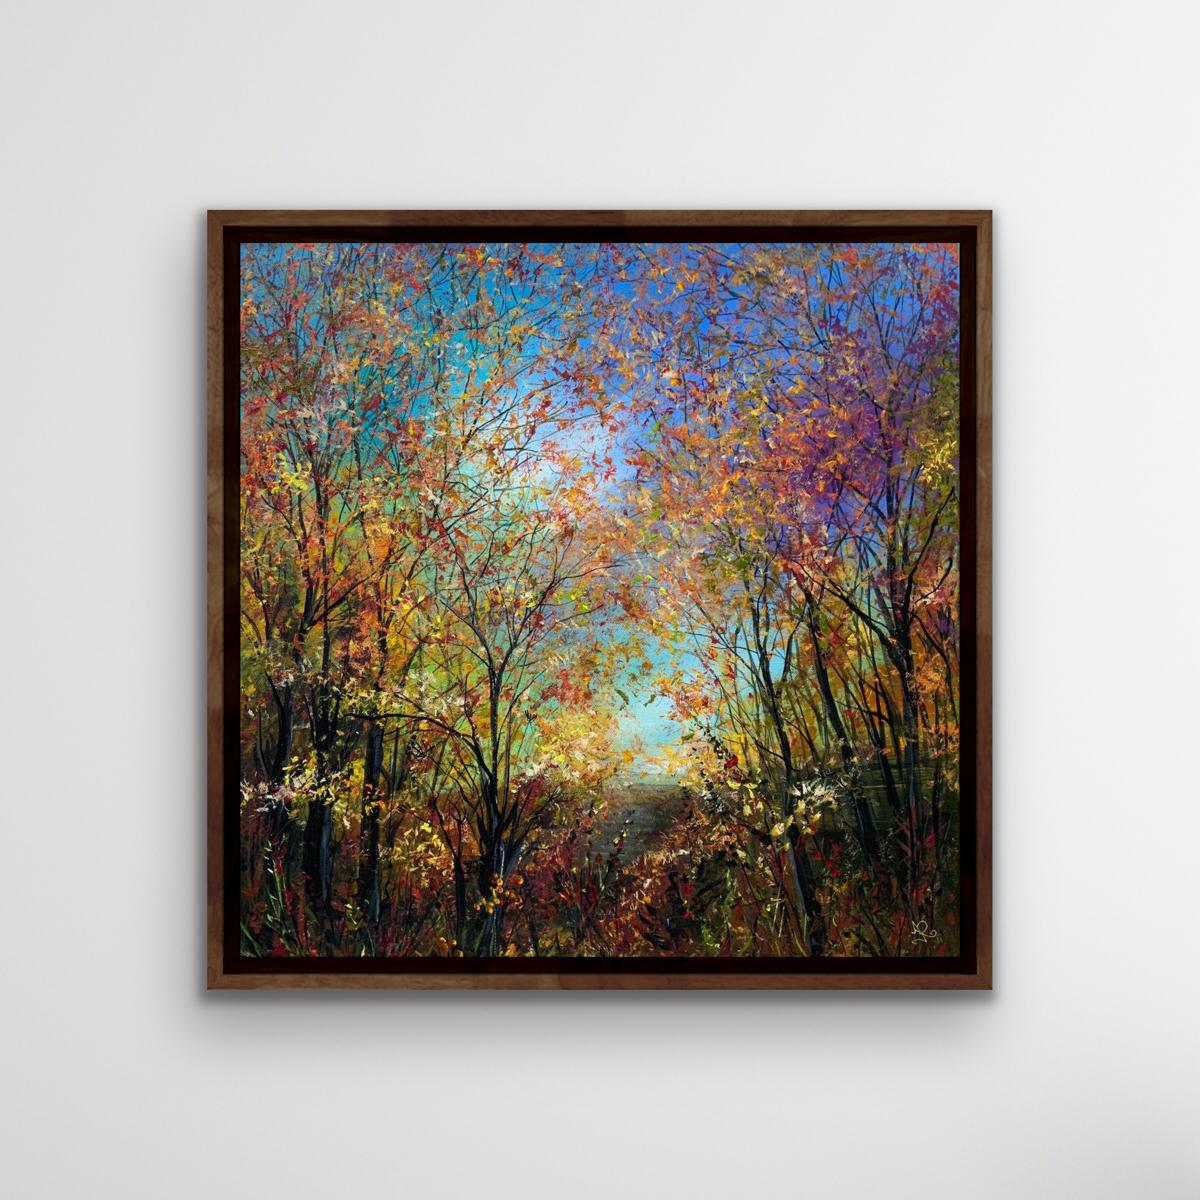 Glorious Autumn at Elnup Wood by Jan Rogers, Woodland painting [2022] For Sale 2